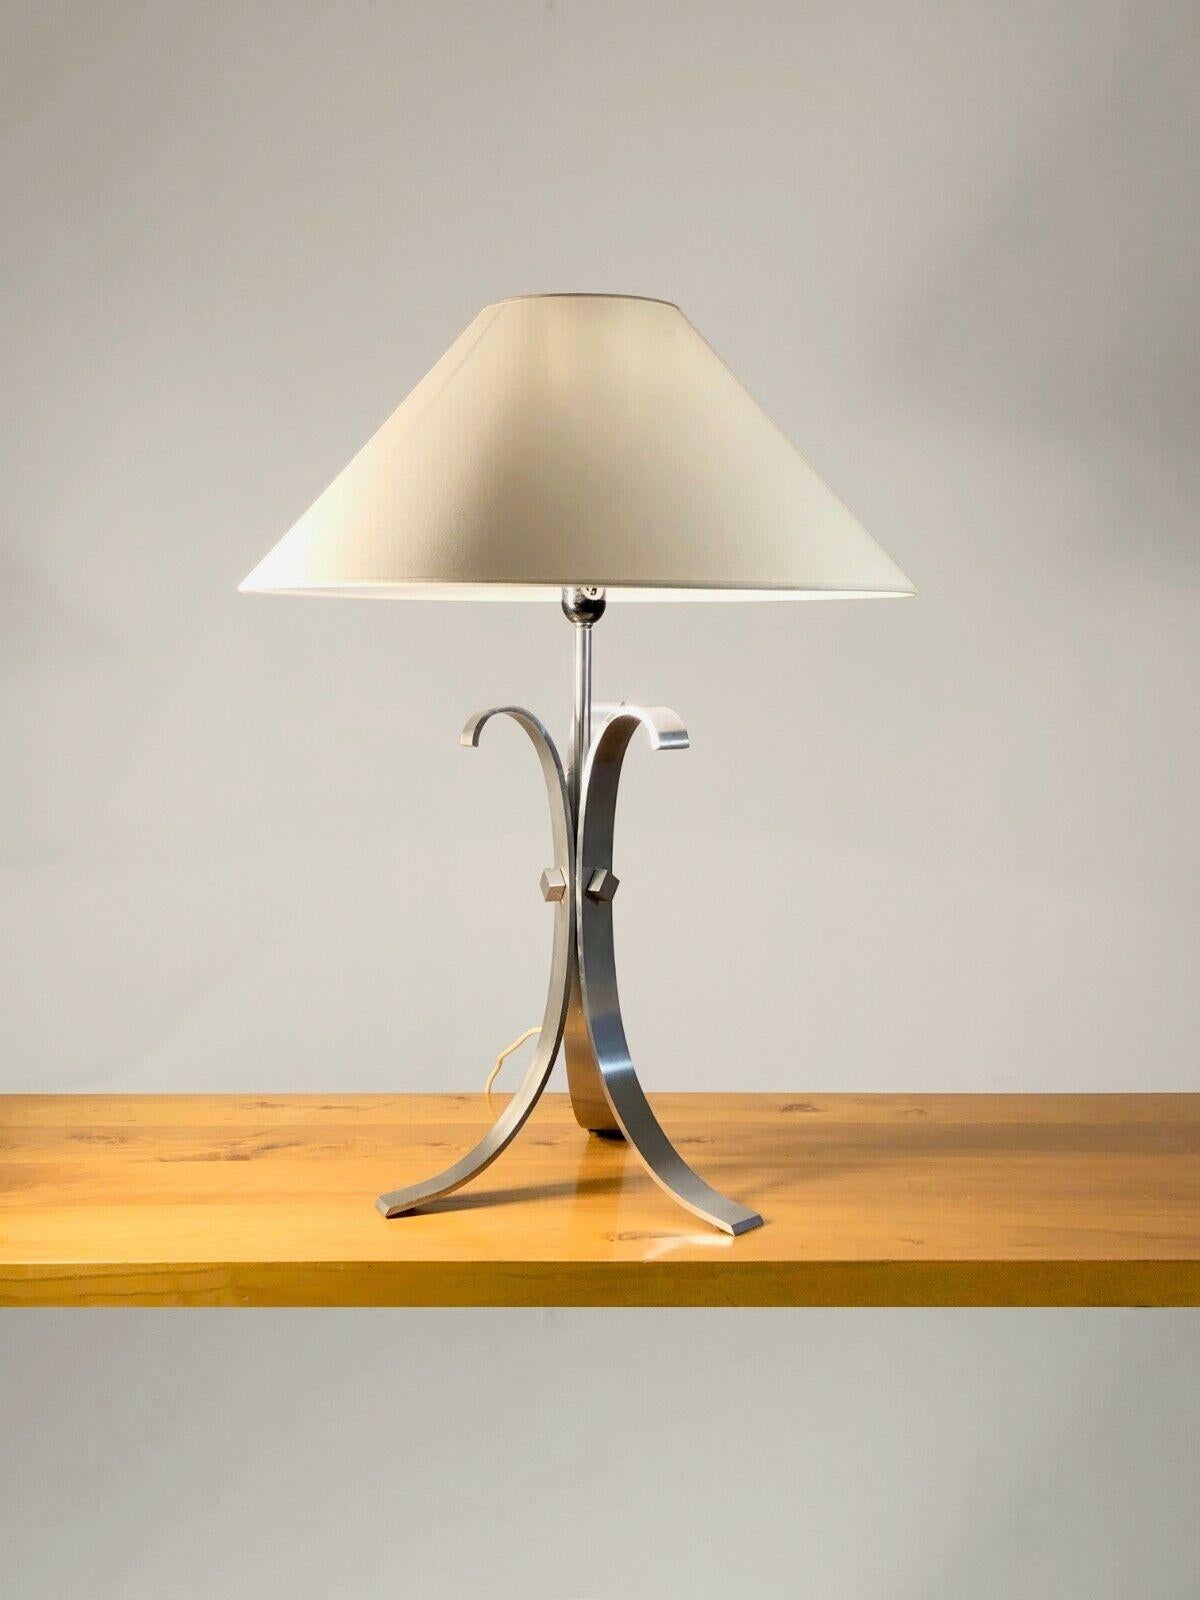 A radical and powerful tripod table lamp in the 